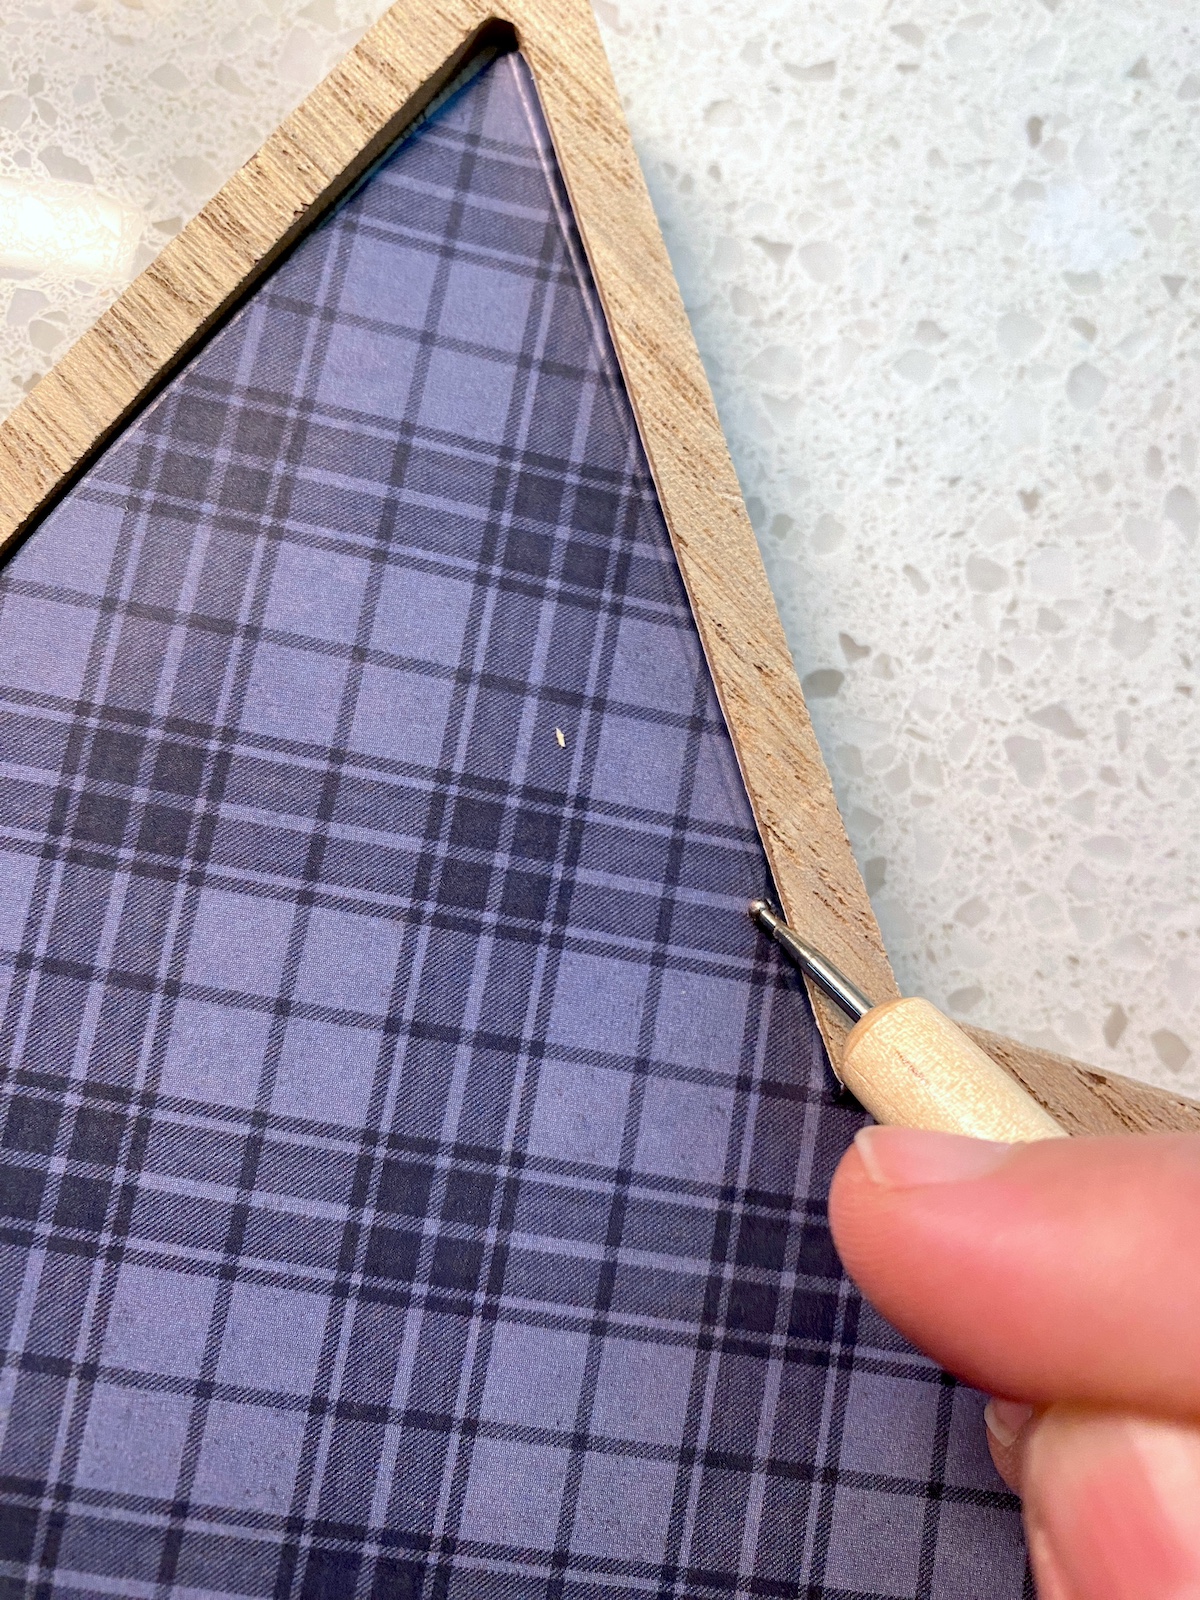 Pressing the plaid scrapbook paper into the corners of the star